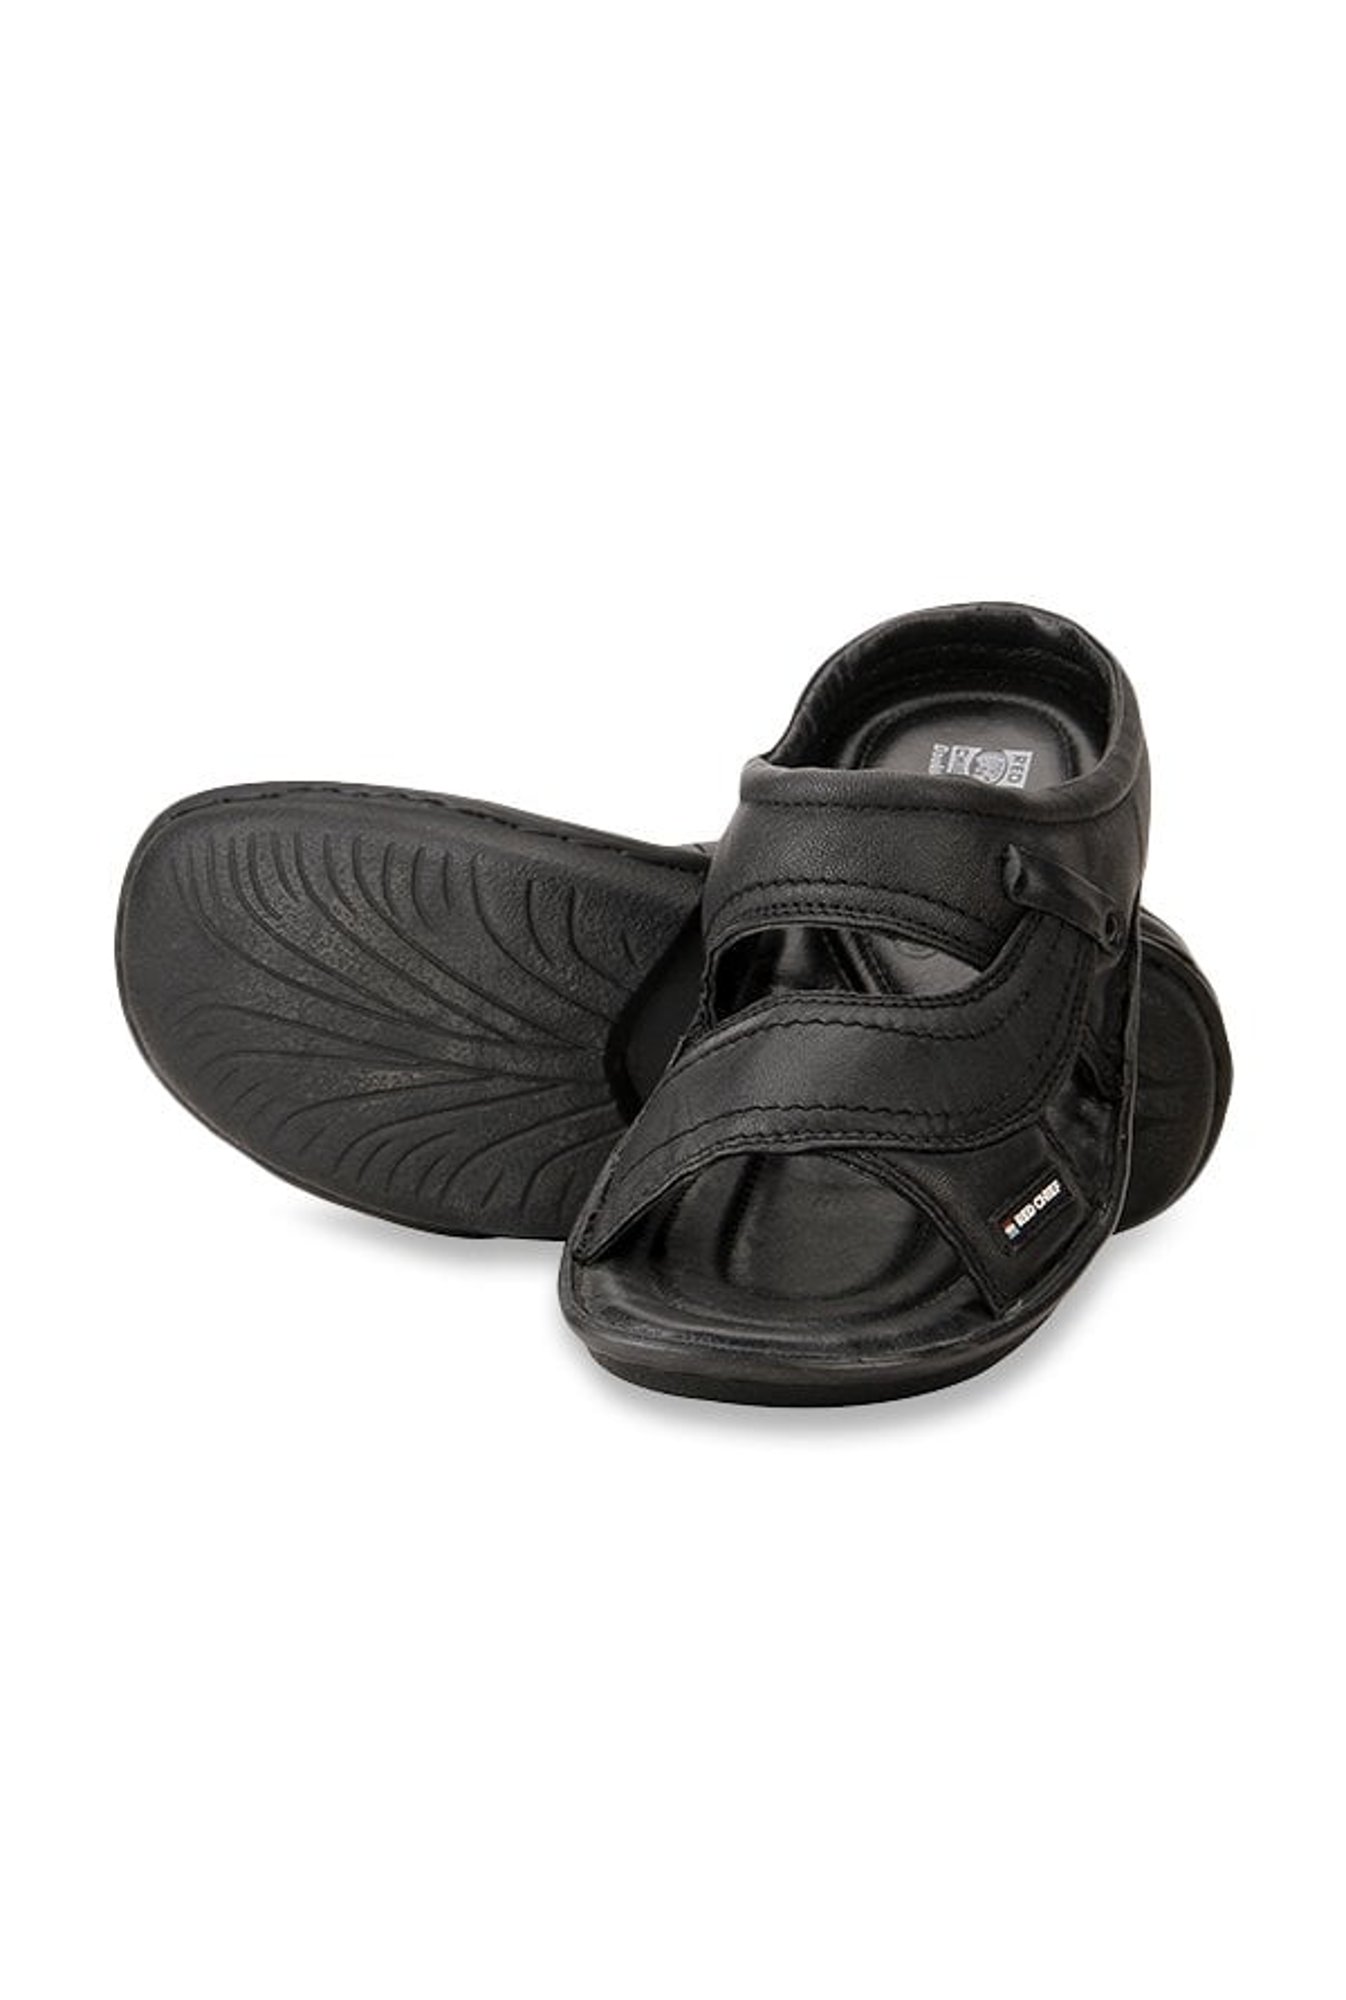 Buy Tan Sandals for Men by Red chief Online | Ajio.com